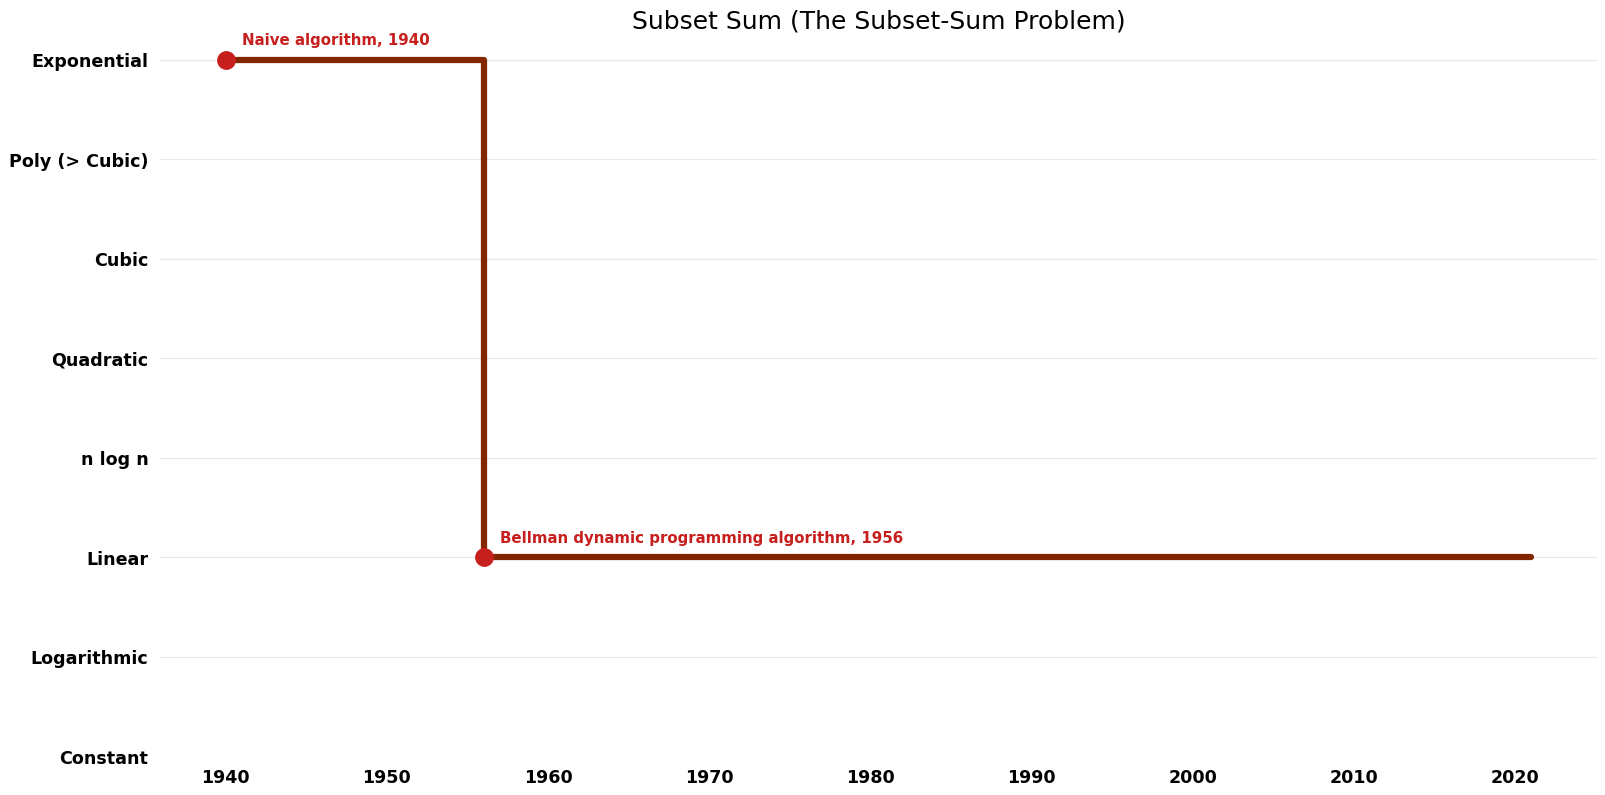 The Subset-Sum Problem - Subset Sum - Time.png